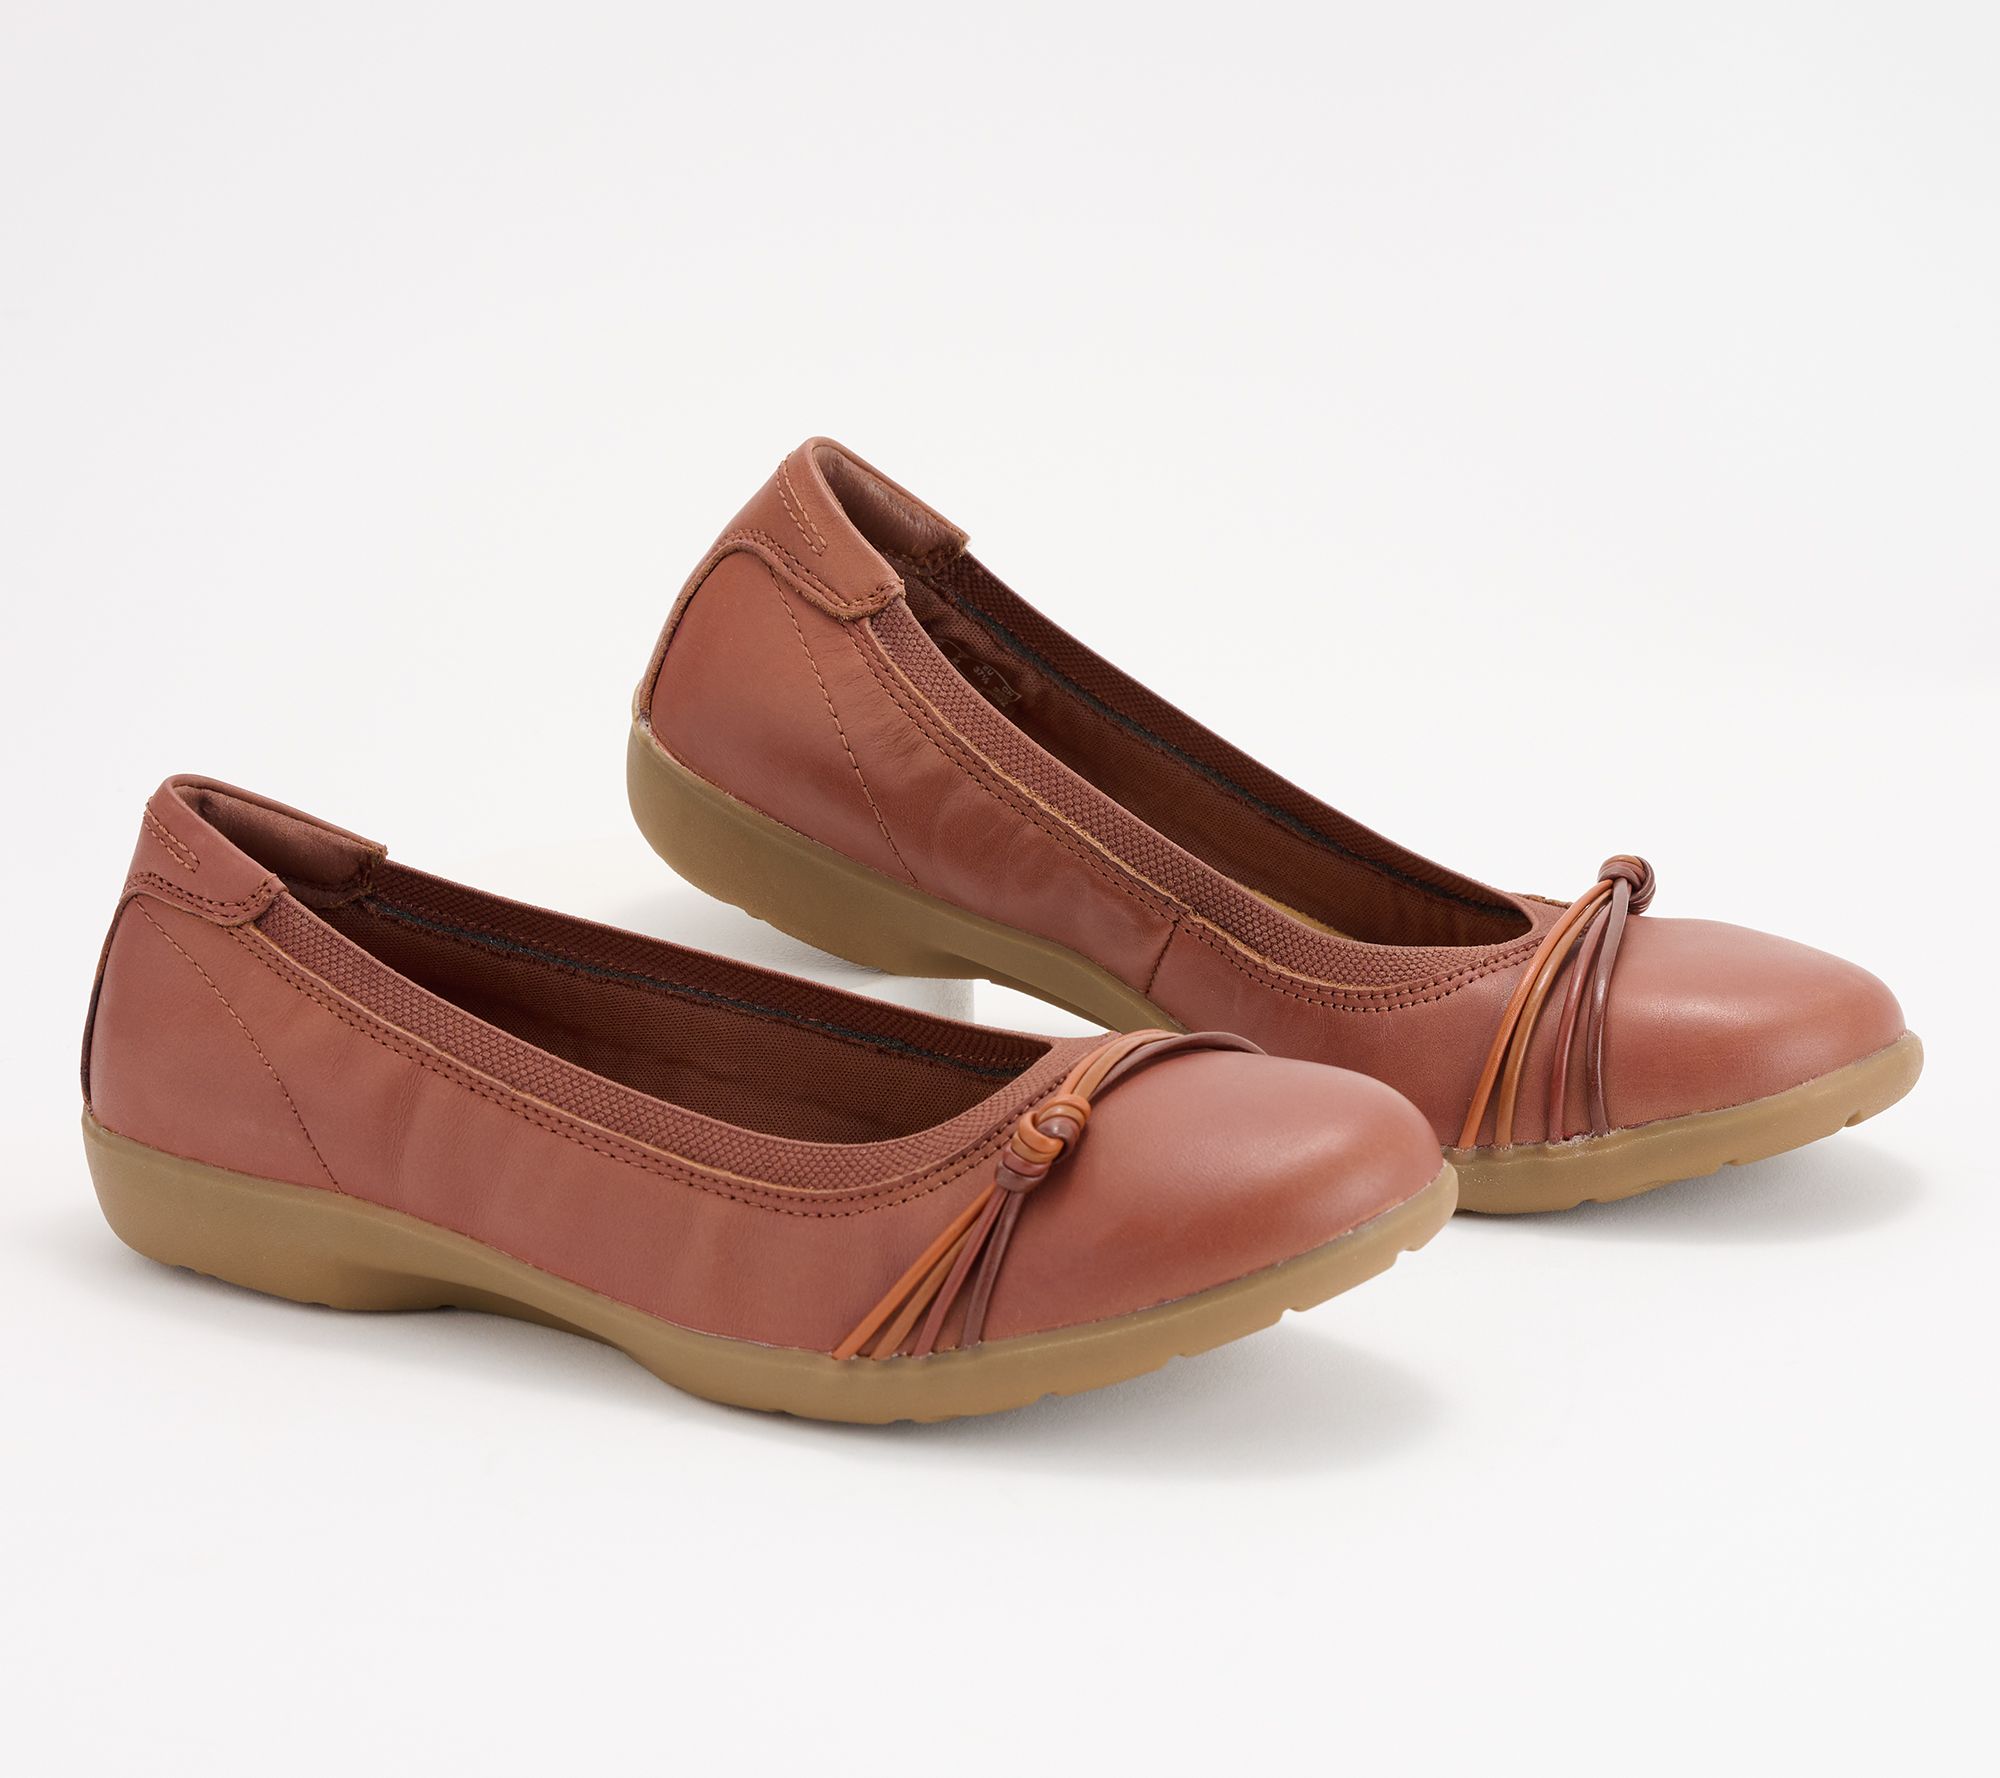 Clarks Collection Leather Ballet Flats - Meadow Rae 